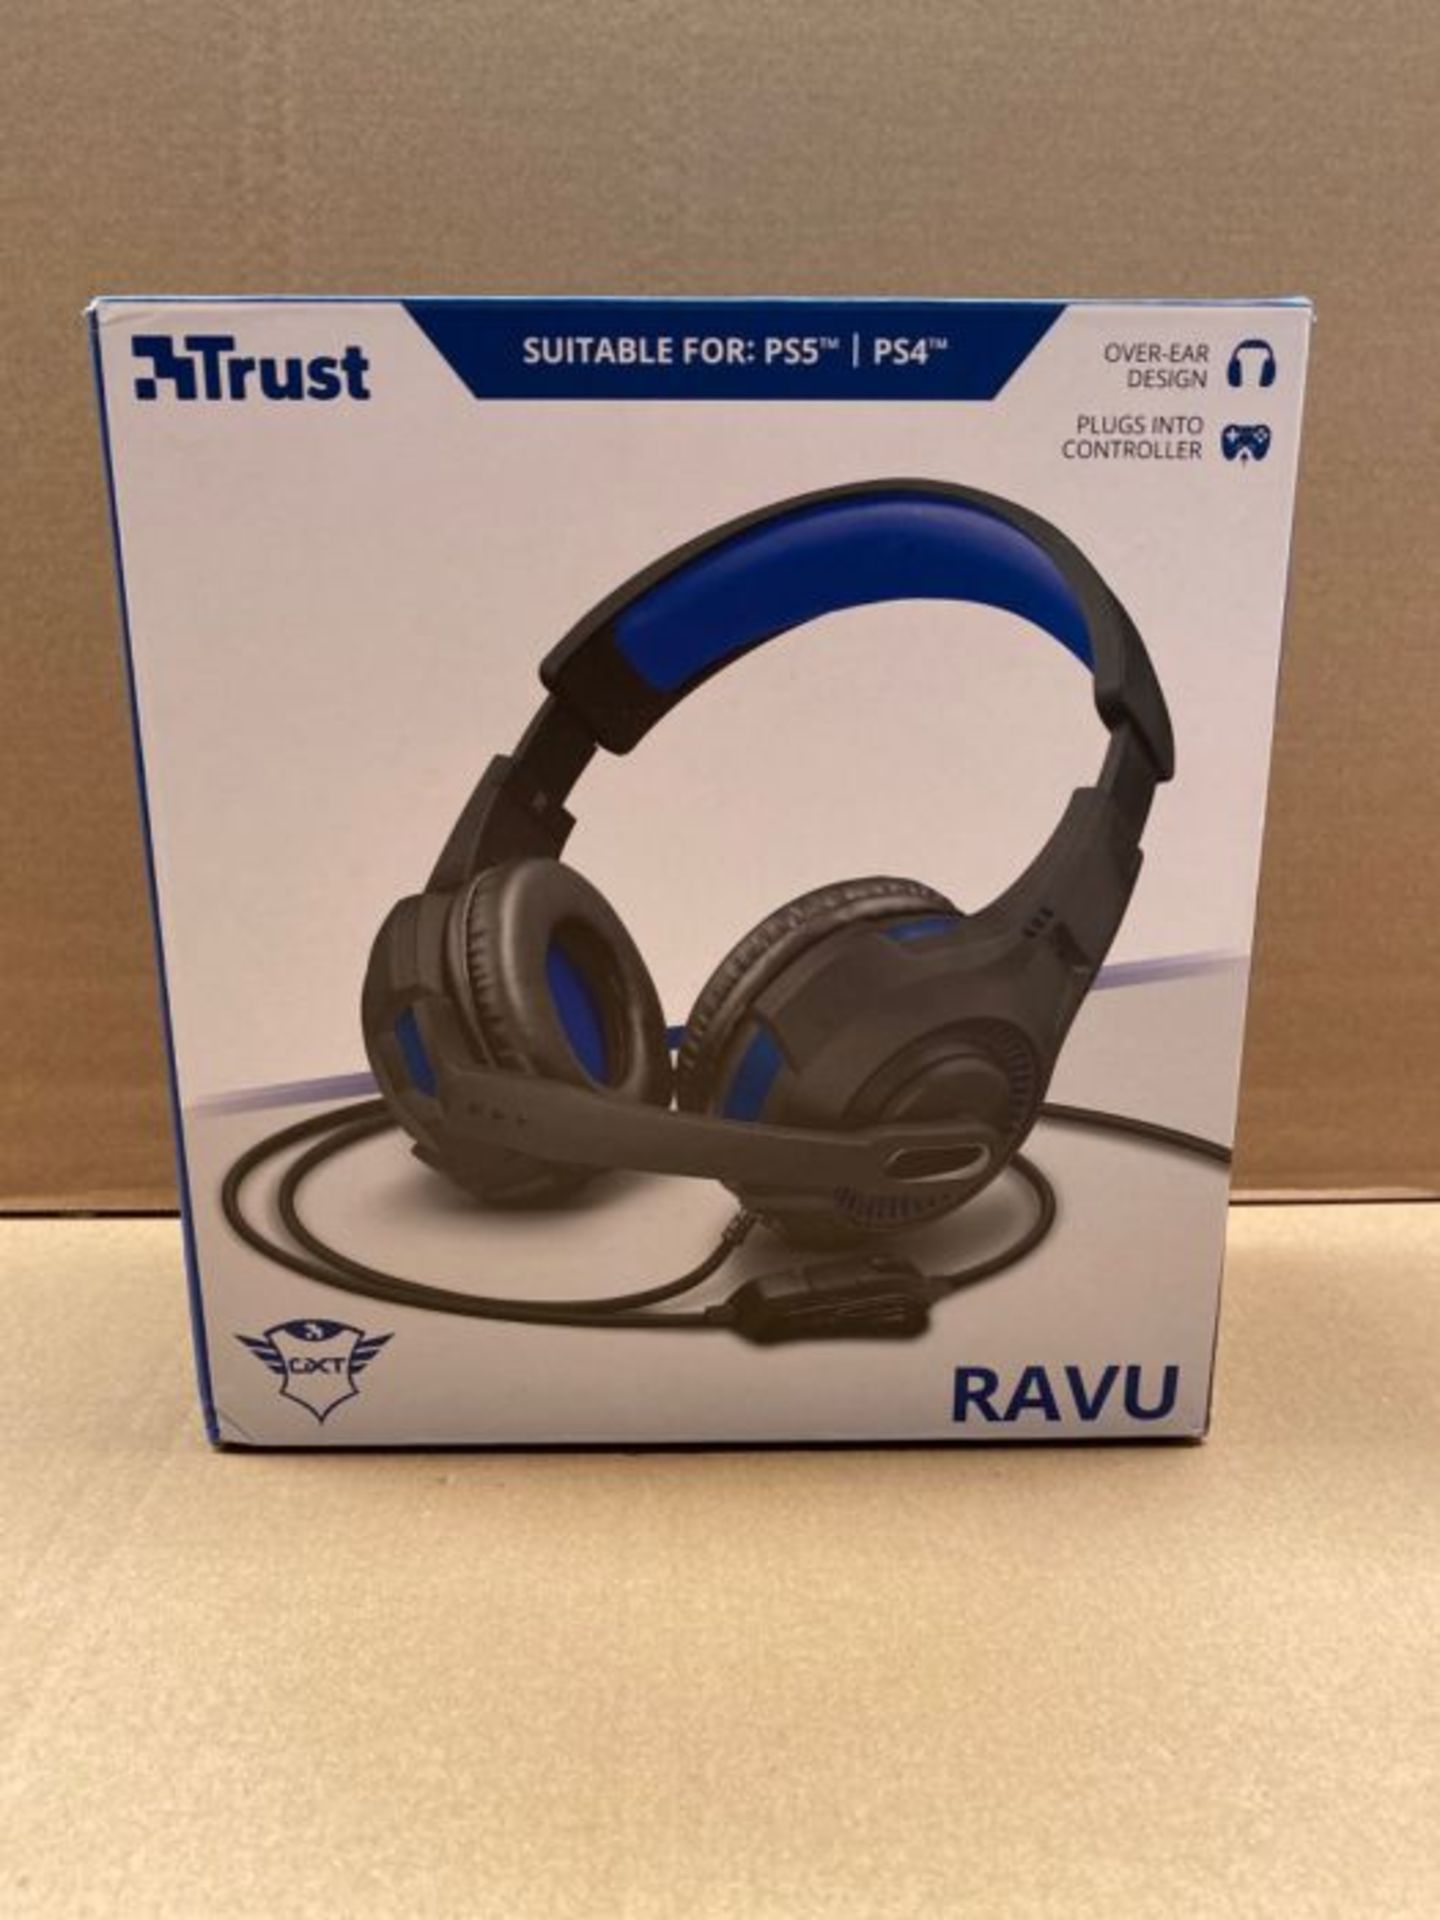 Trust Gaming Headset for Playstation 4 (PS4) and Playstation 5 (PS5) GXT 307B Ravu wit - Image 2 of 3